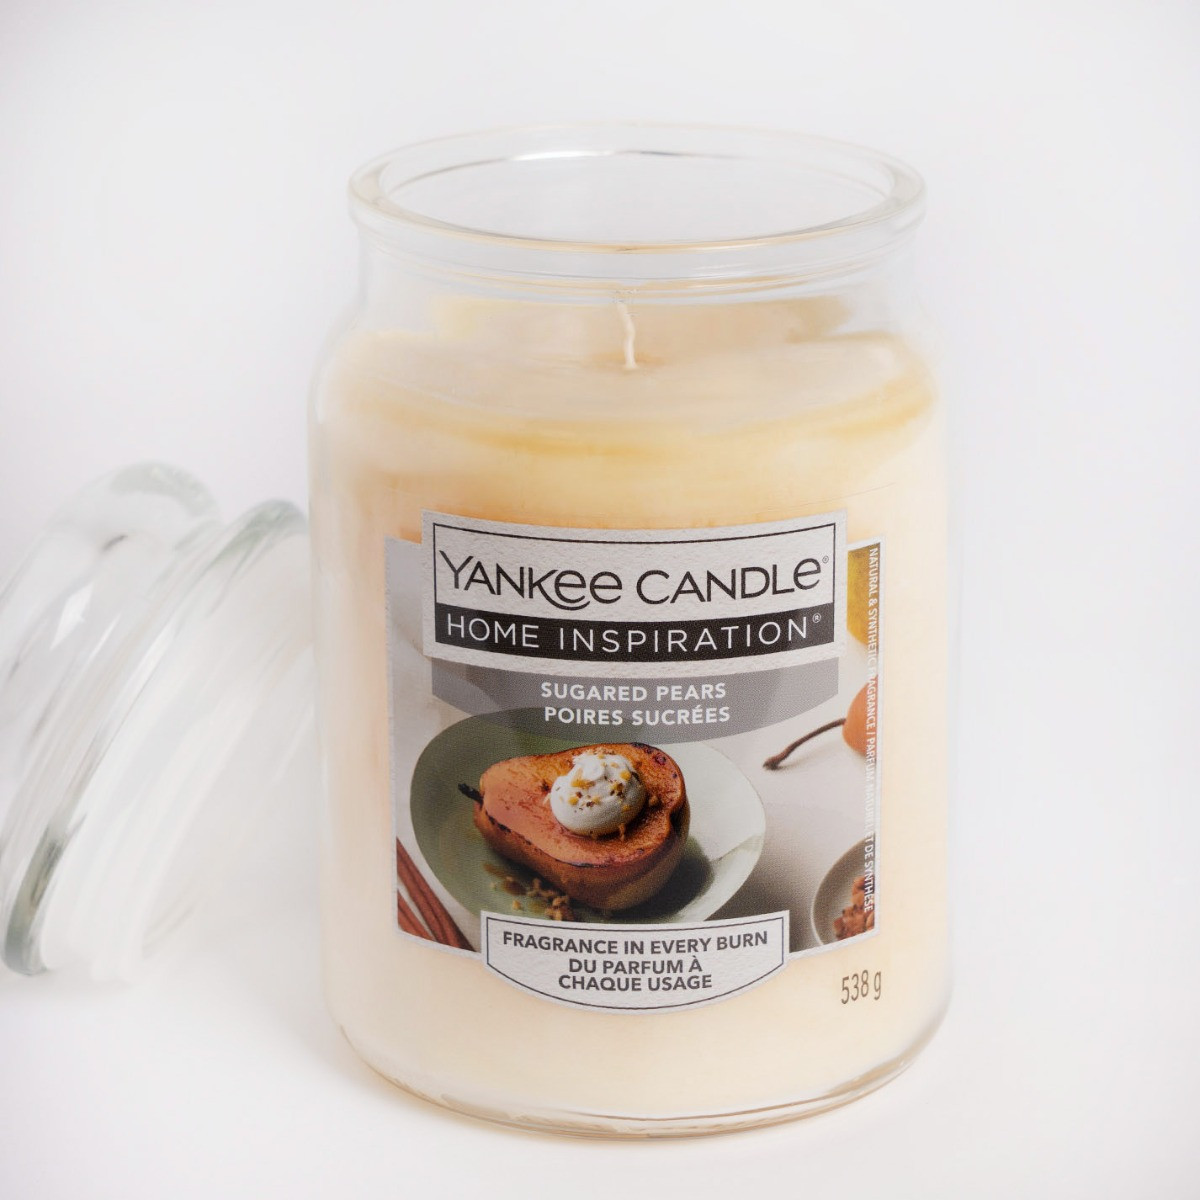 Yankee Candle Home Inspiration Large Jar - Sugared Pears>